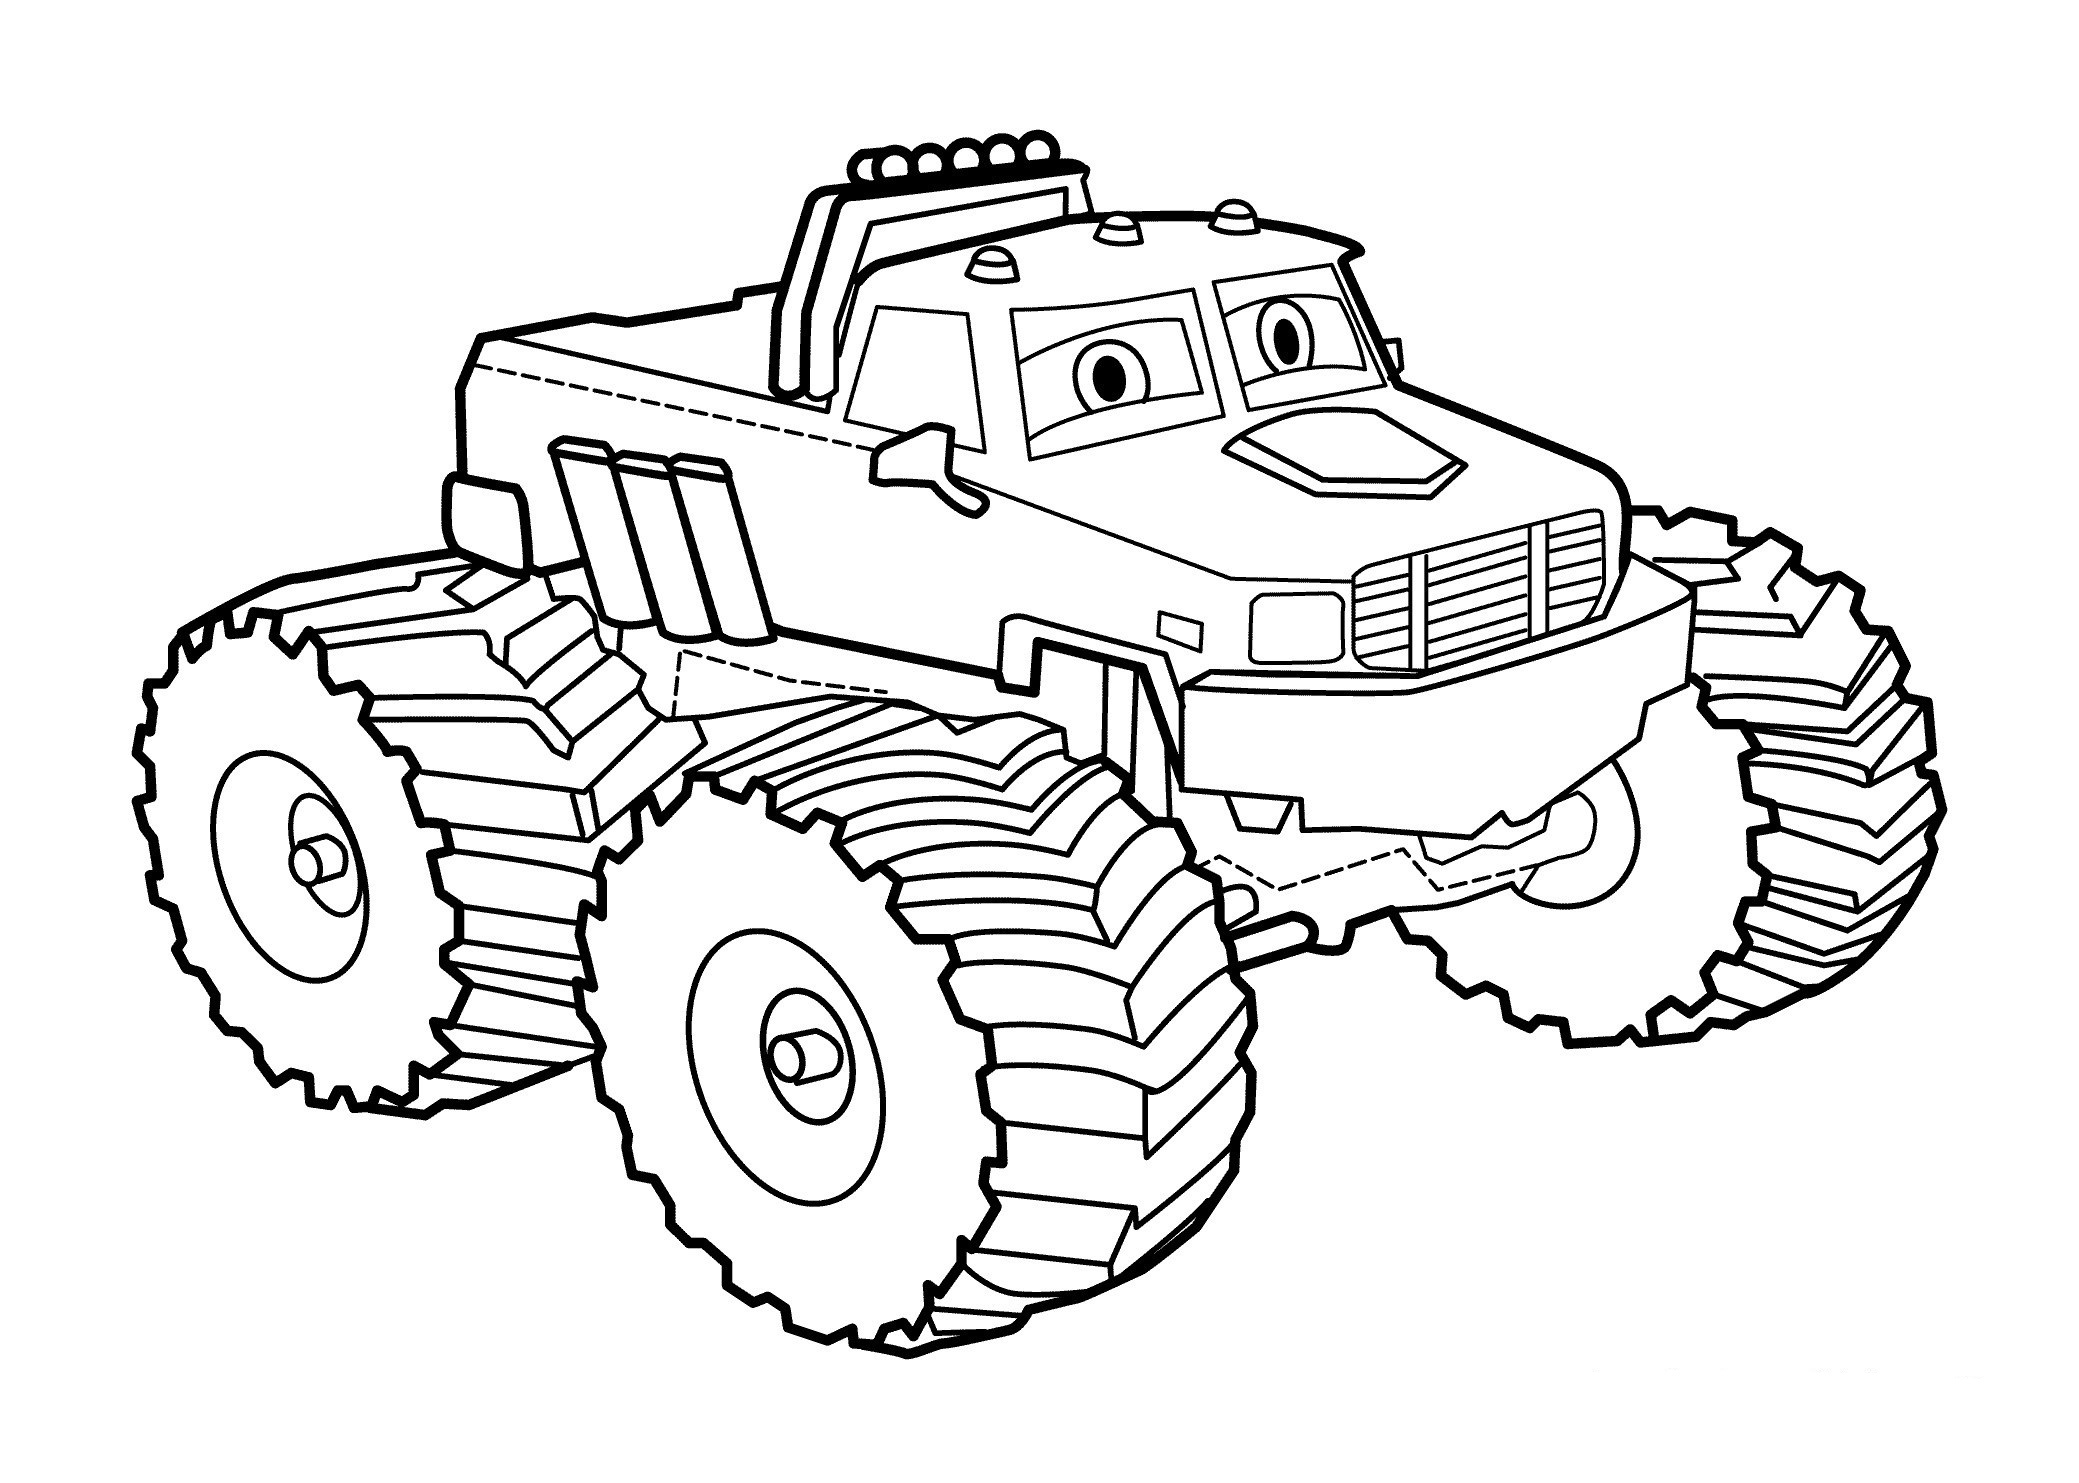 Download Awesome Cartoon Monster Truck Coloring Page - Free ...